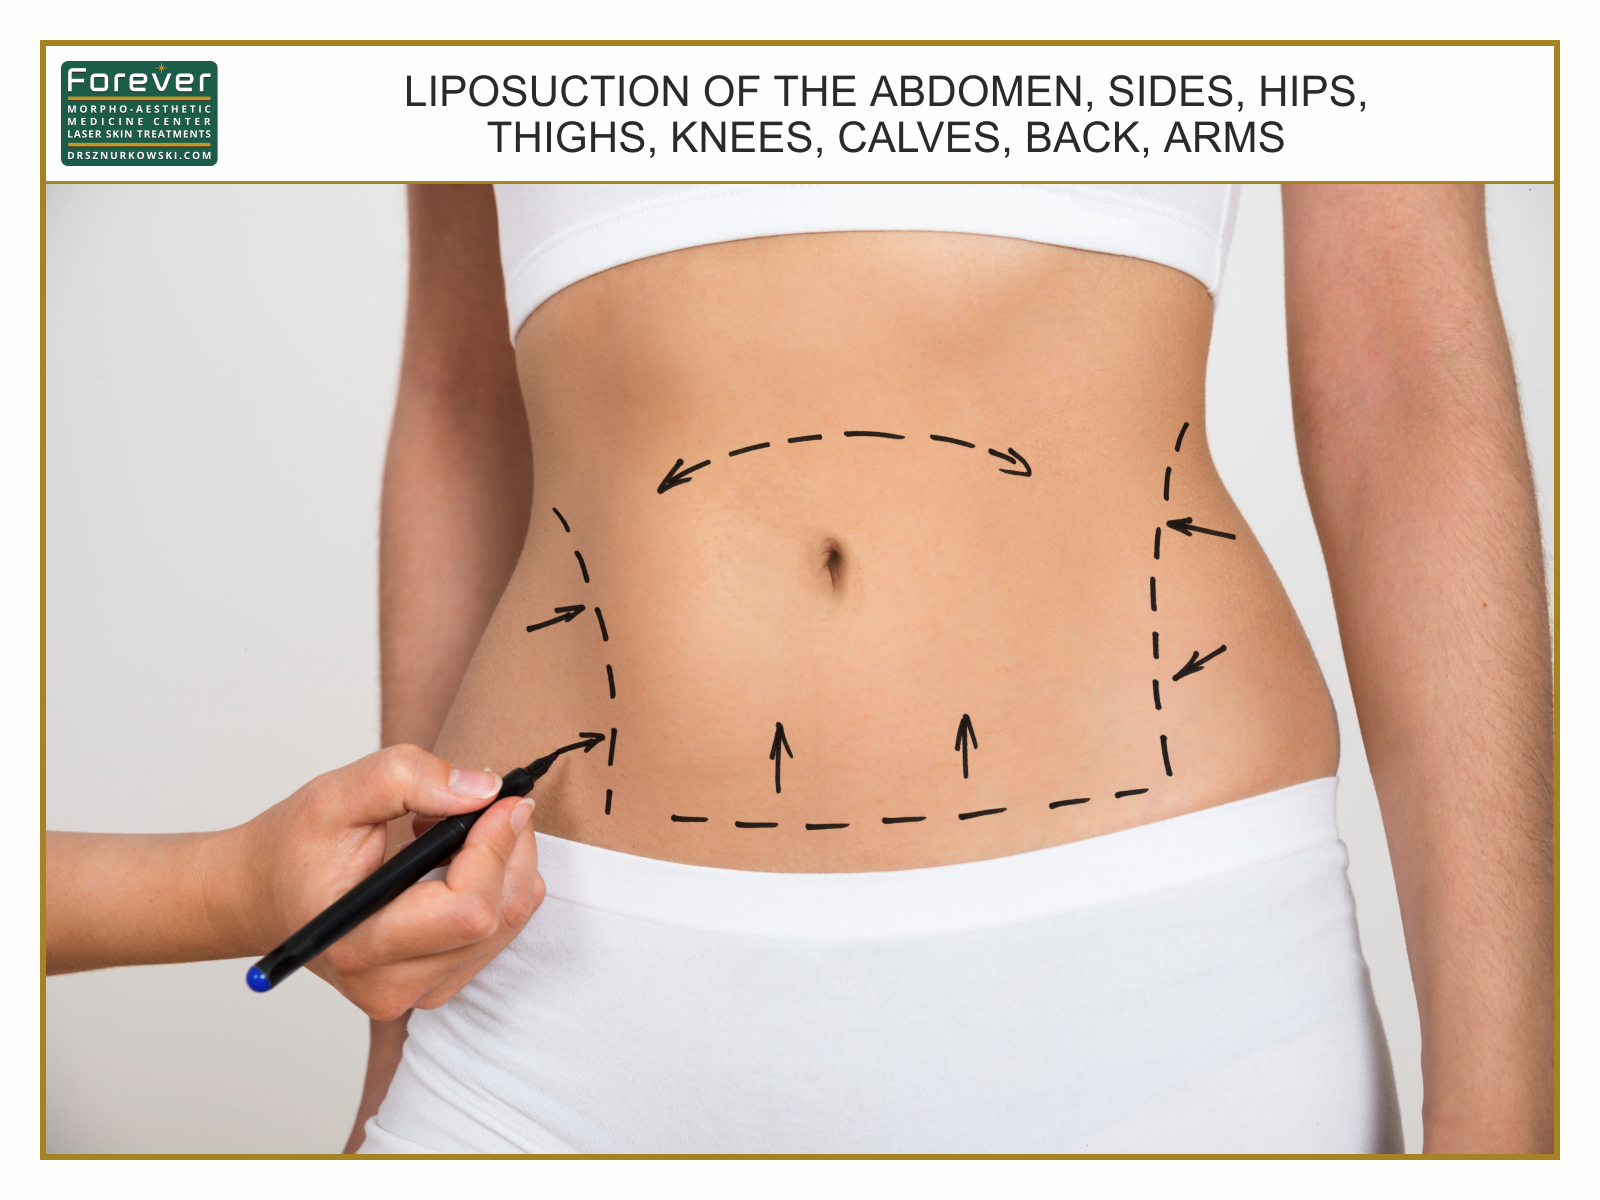 Liposuction of the Abdomen, Sides, Hips, Thighs, Knees, Calves, Back, Arms.jpg